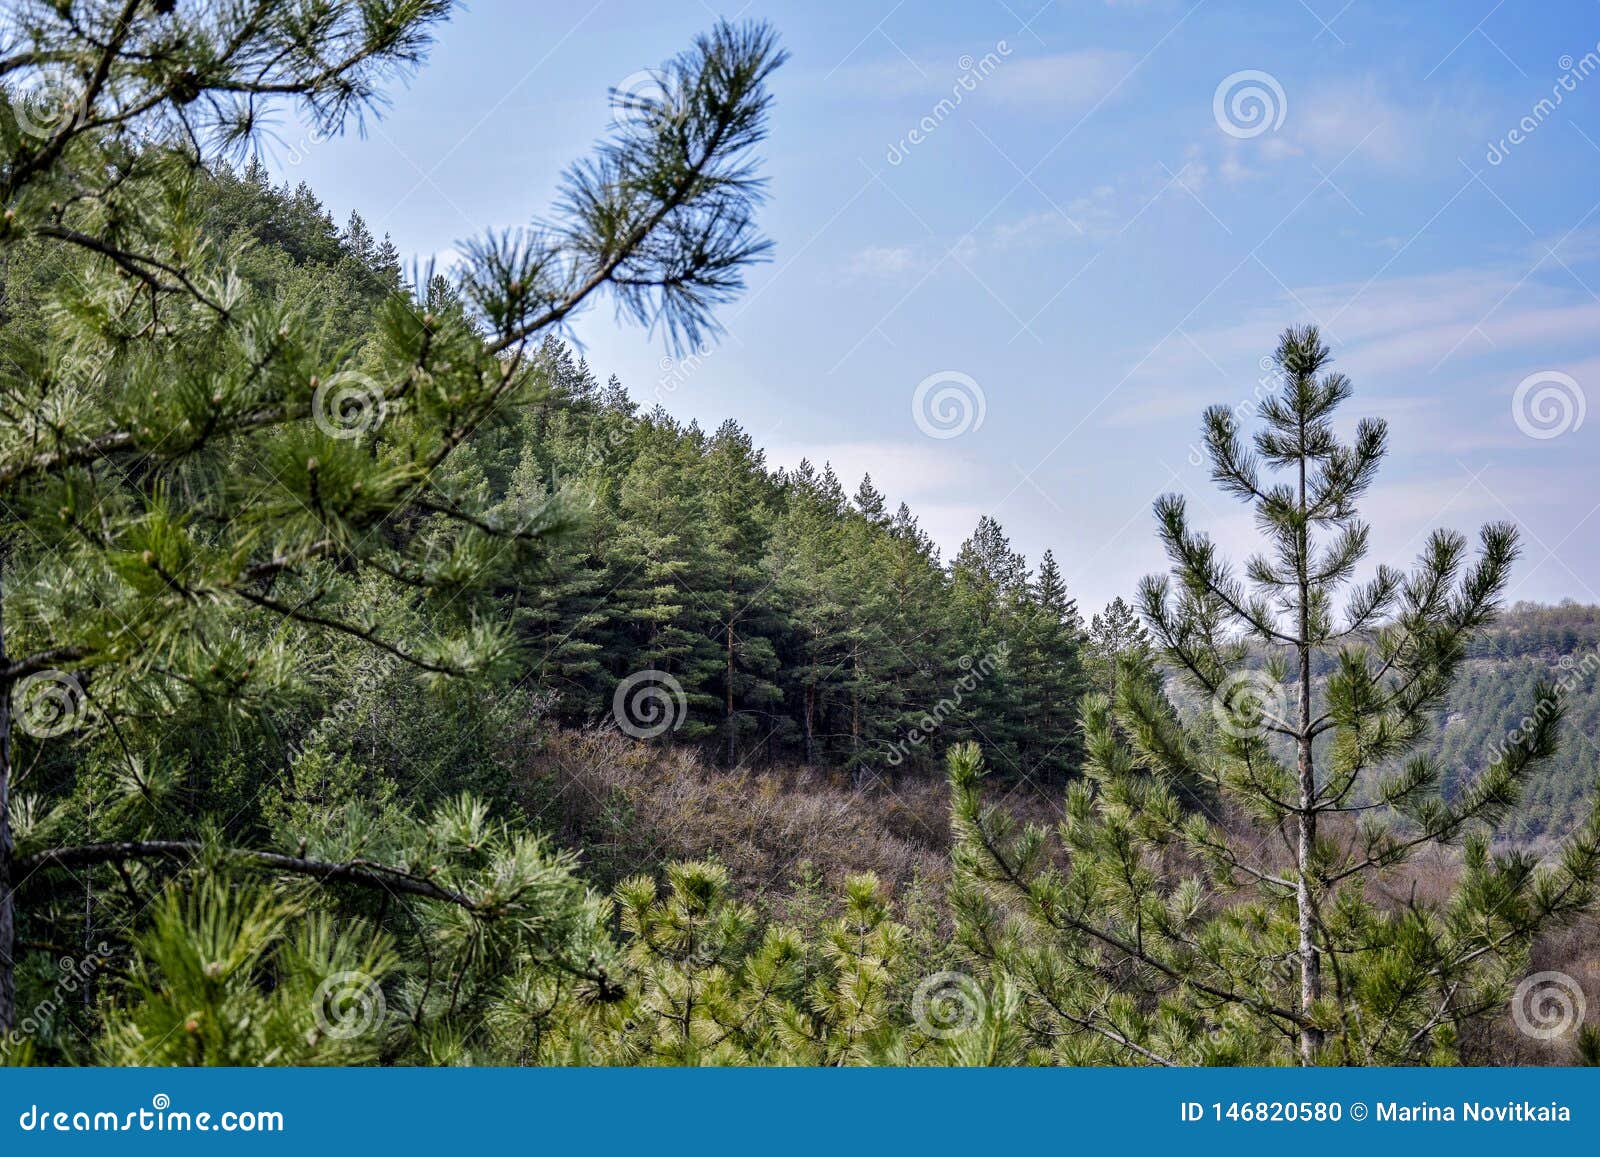 View Of The Mountain Slope With Pine Forest Against The ...